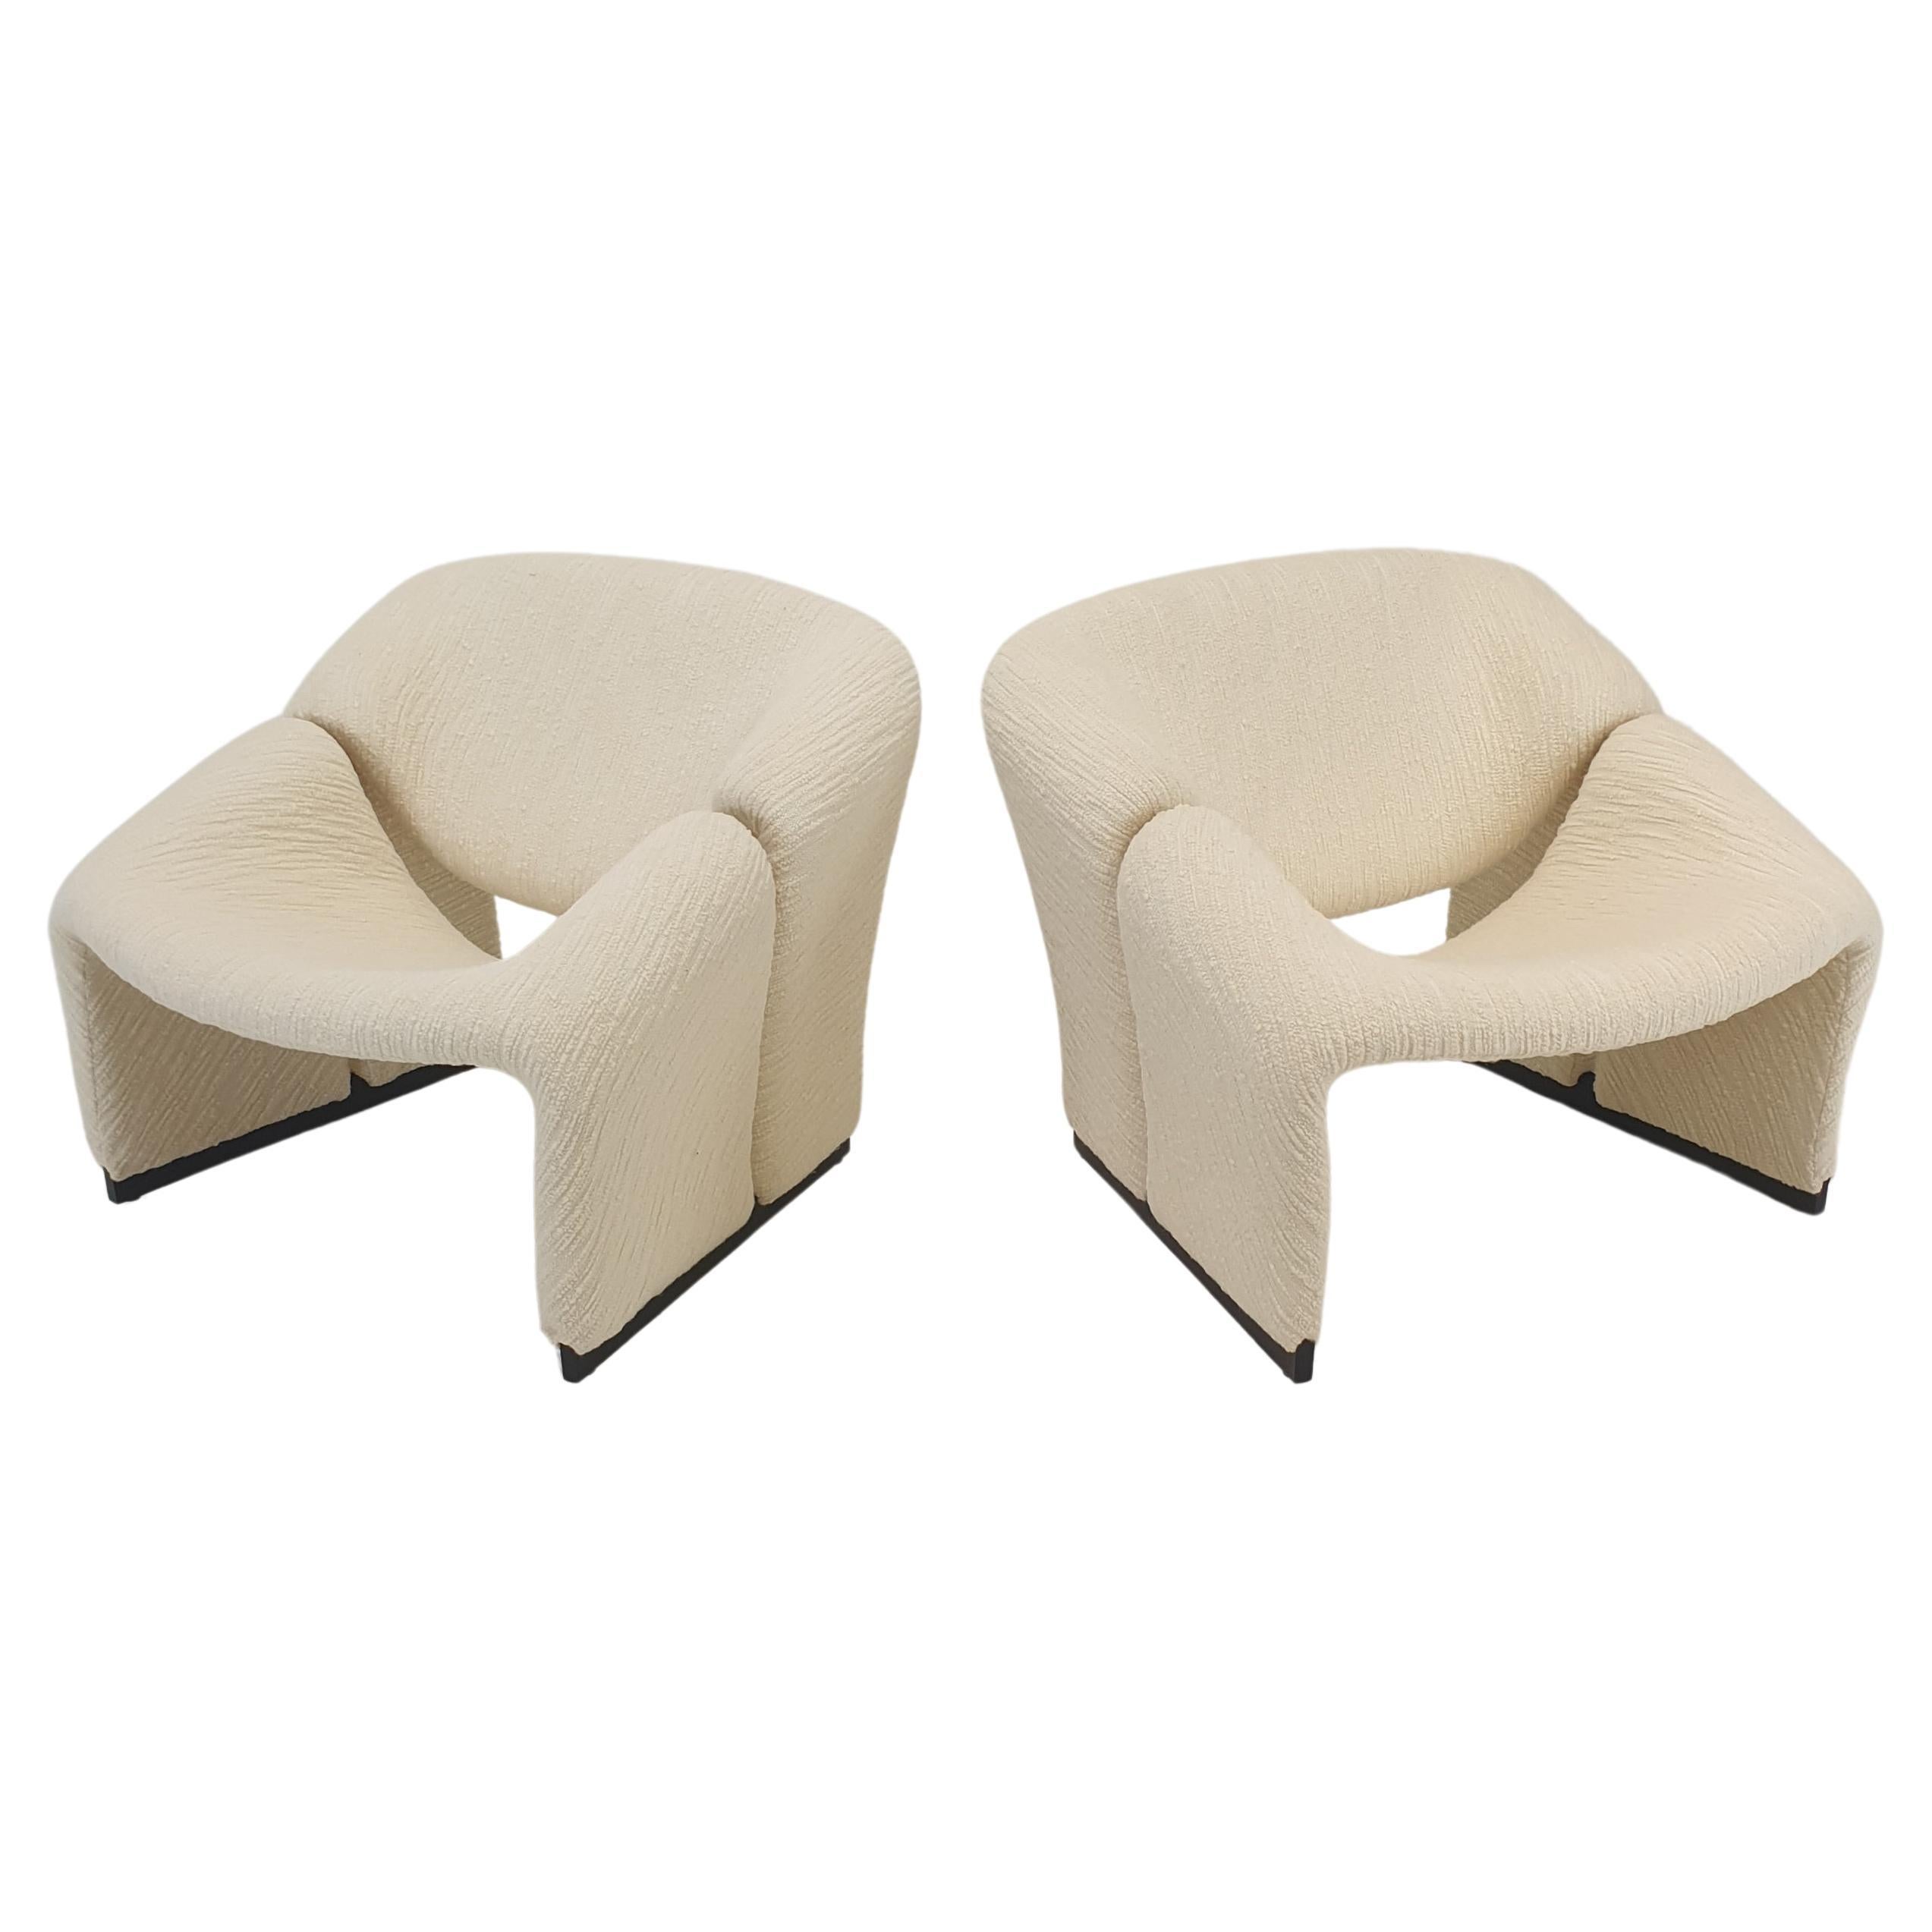 Set of 2 Model F580 Groovy Chairs by Pierre Paulin for Artifort, 1966